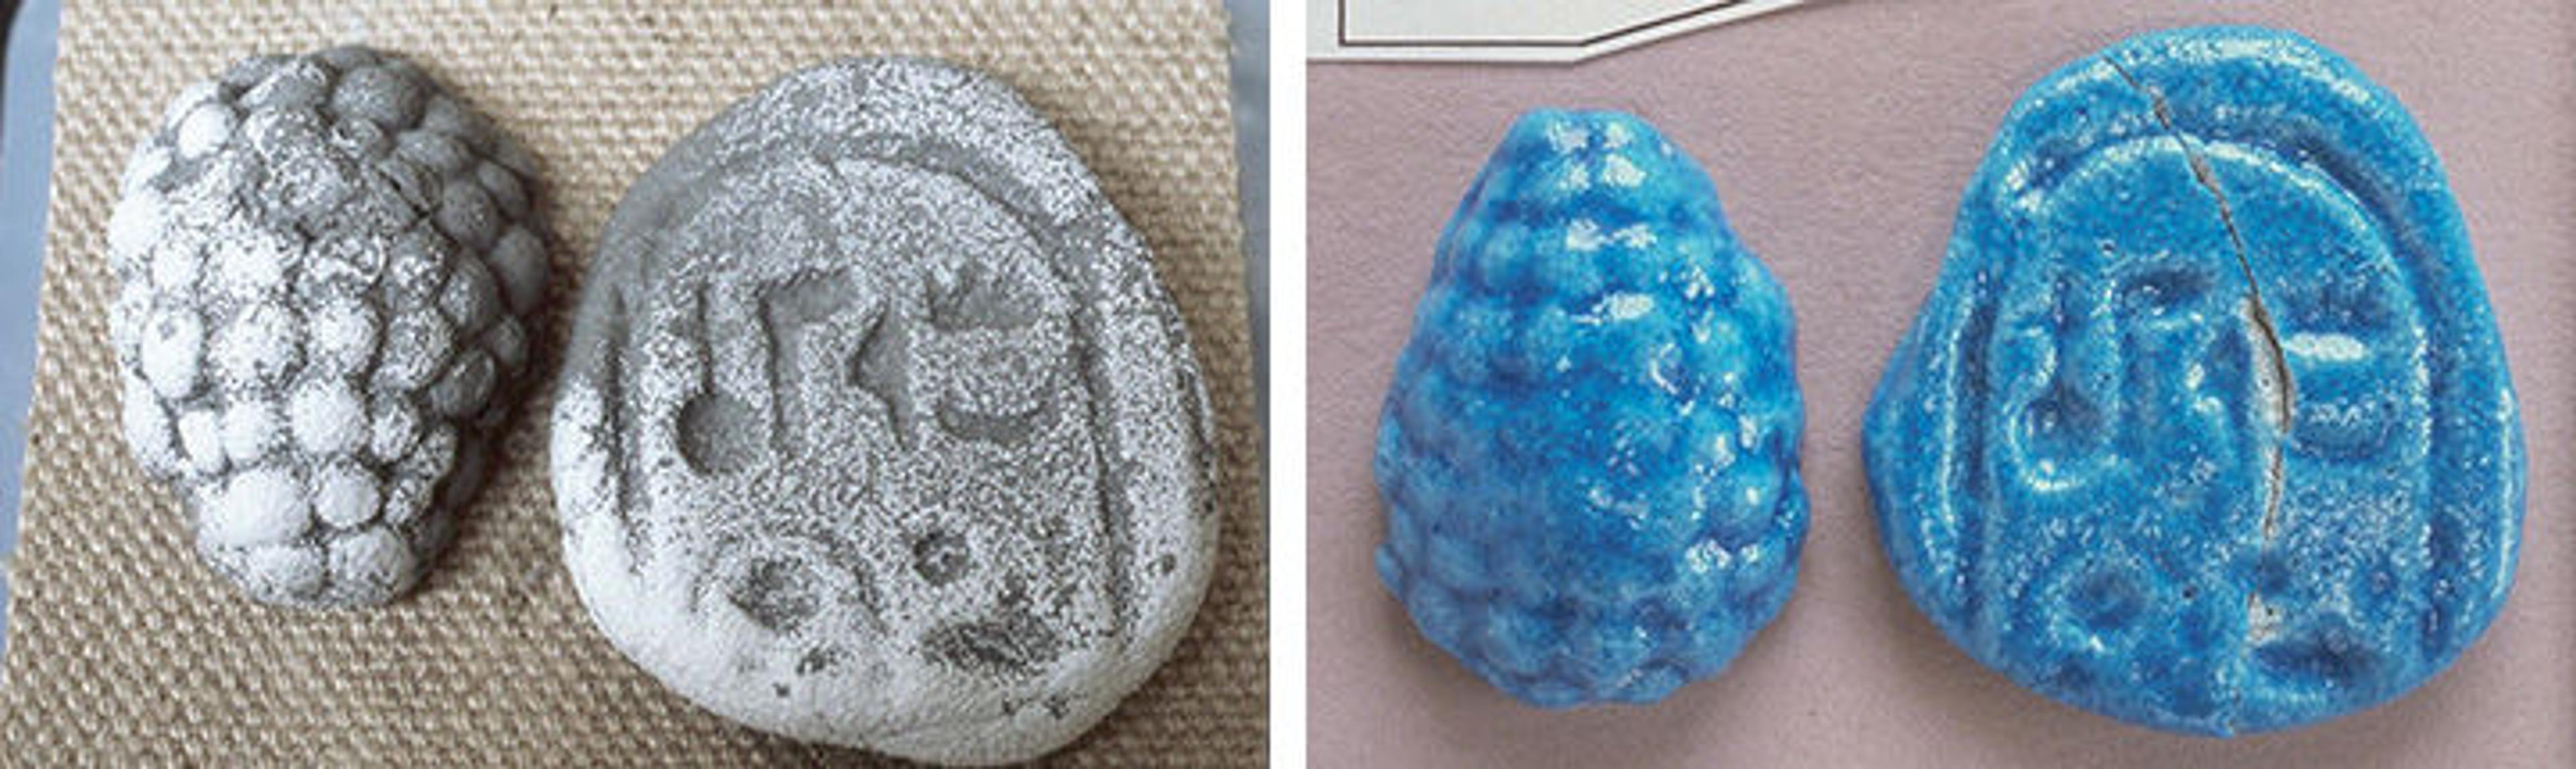 Faience paste during the drying process (grey) and after firing (blue)